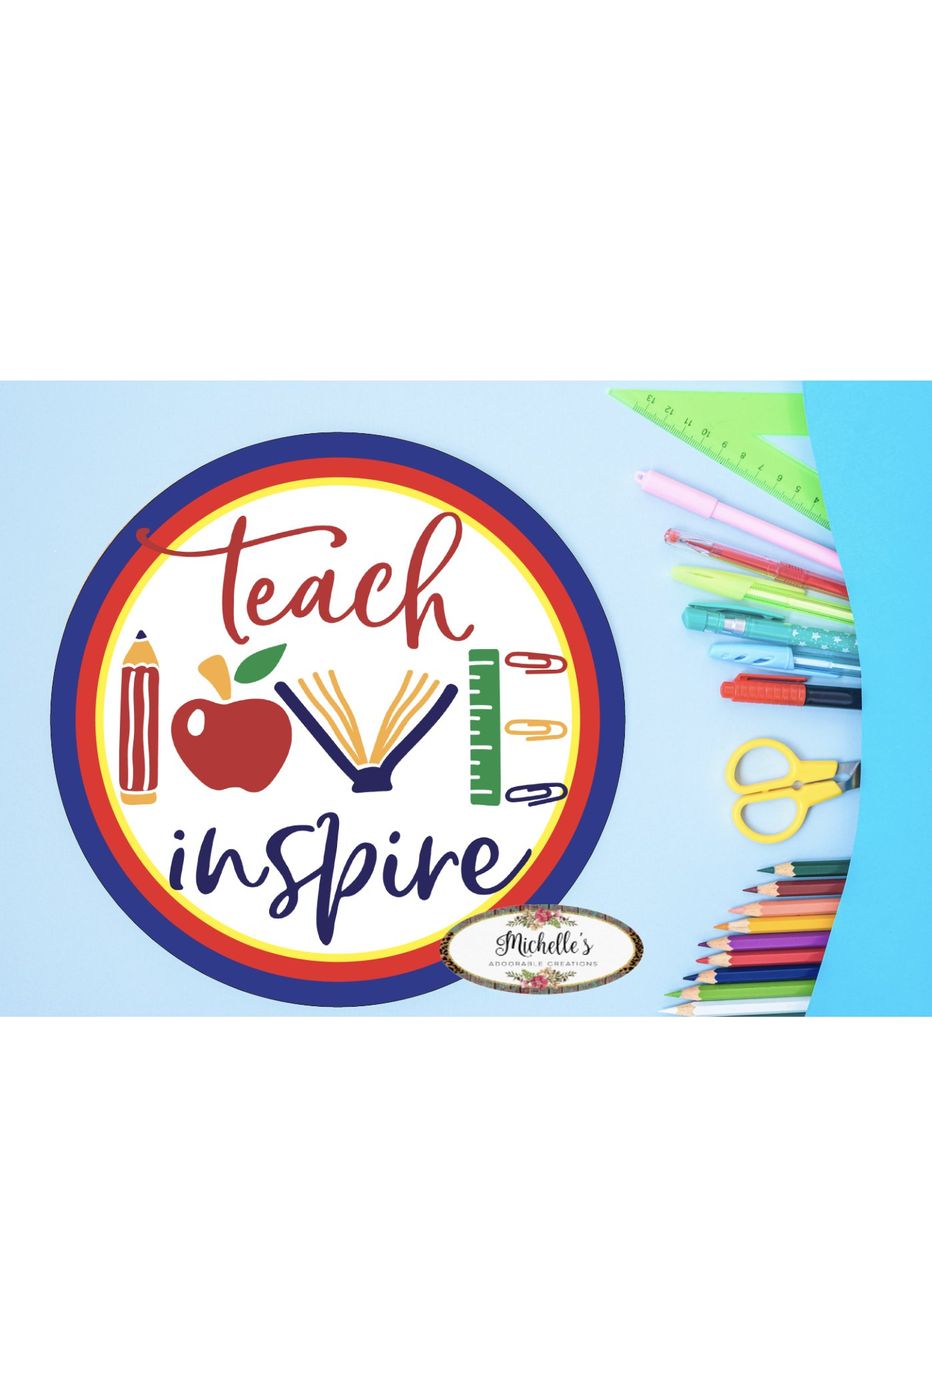 Teach Love Inspire Round Sign - Wreath Enhancement - Michelle's aDOORable Creations - Signature Signs